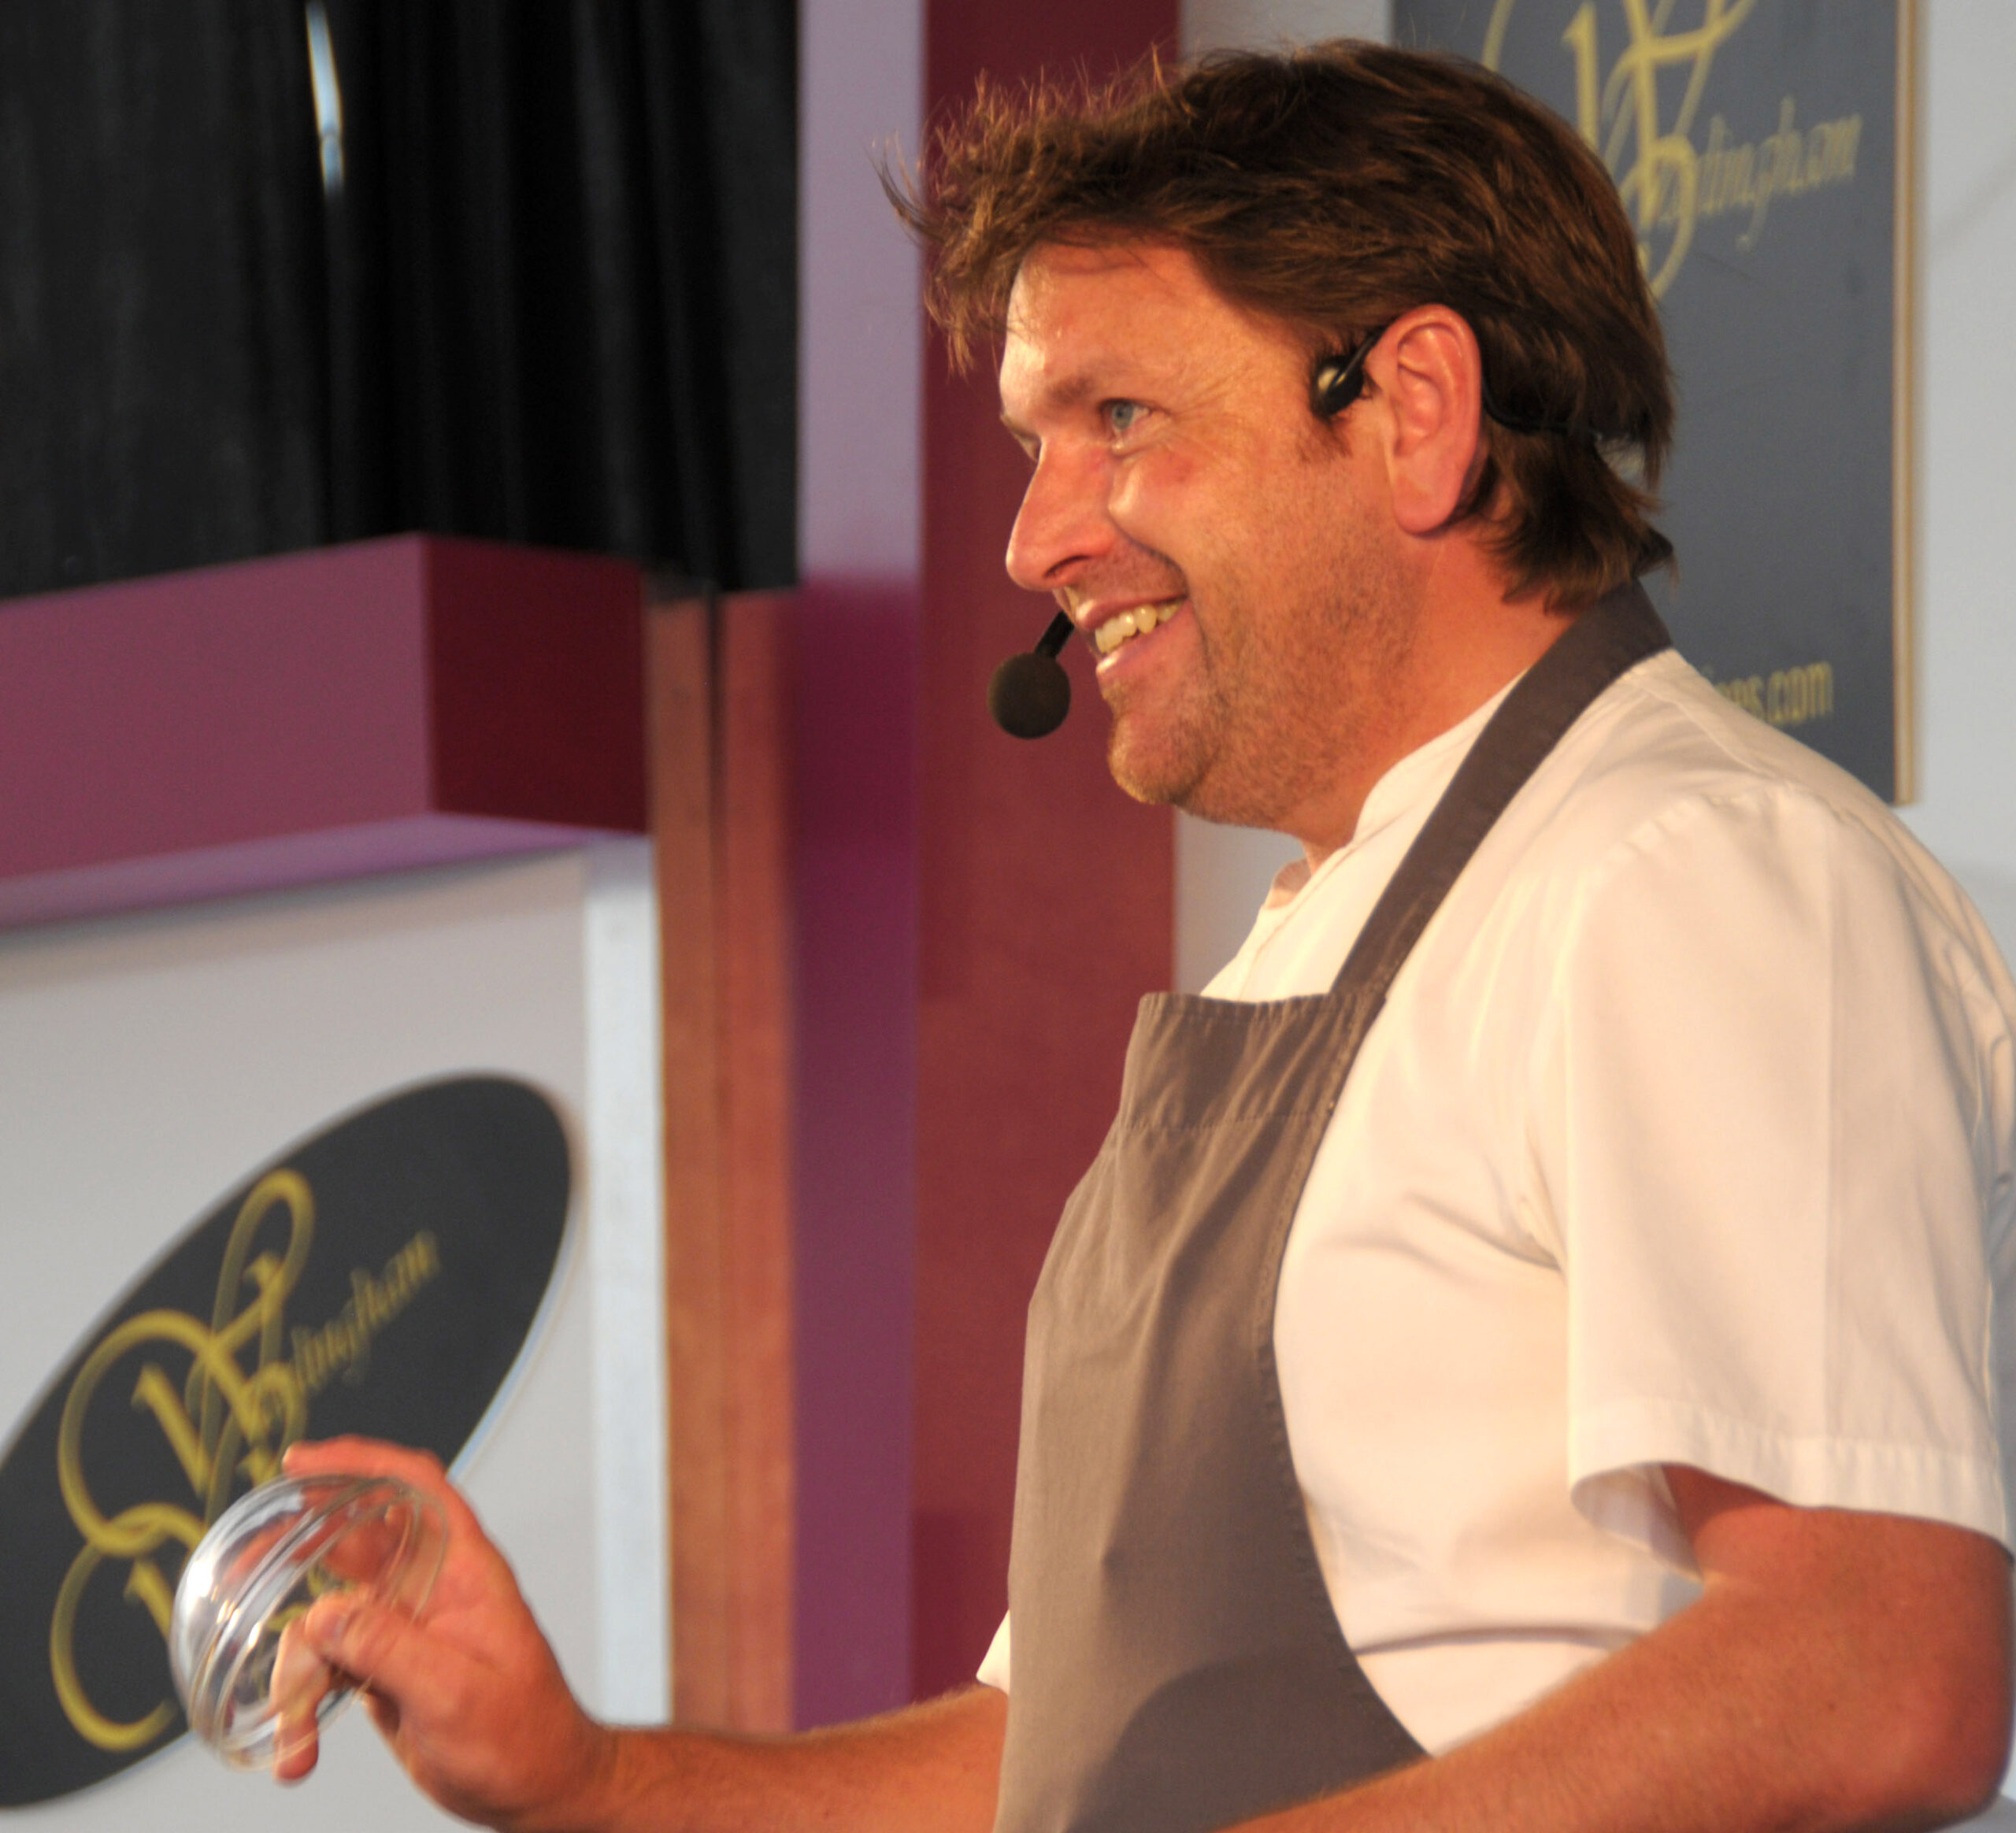 James Martin on the Chef's demonstration stage